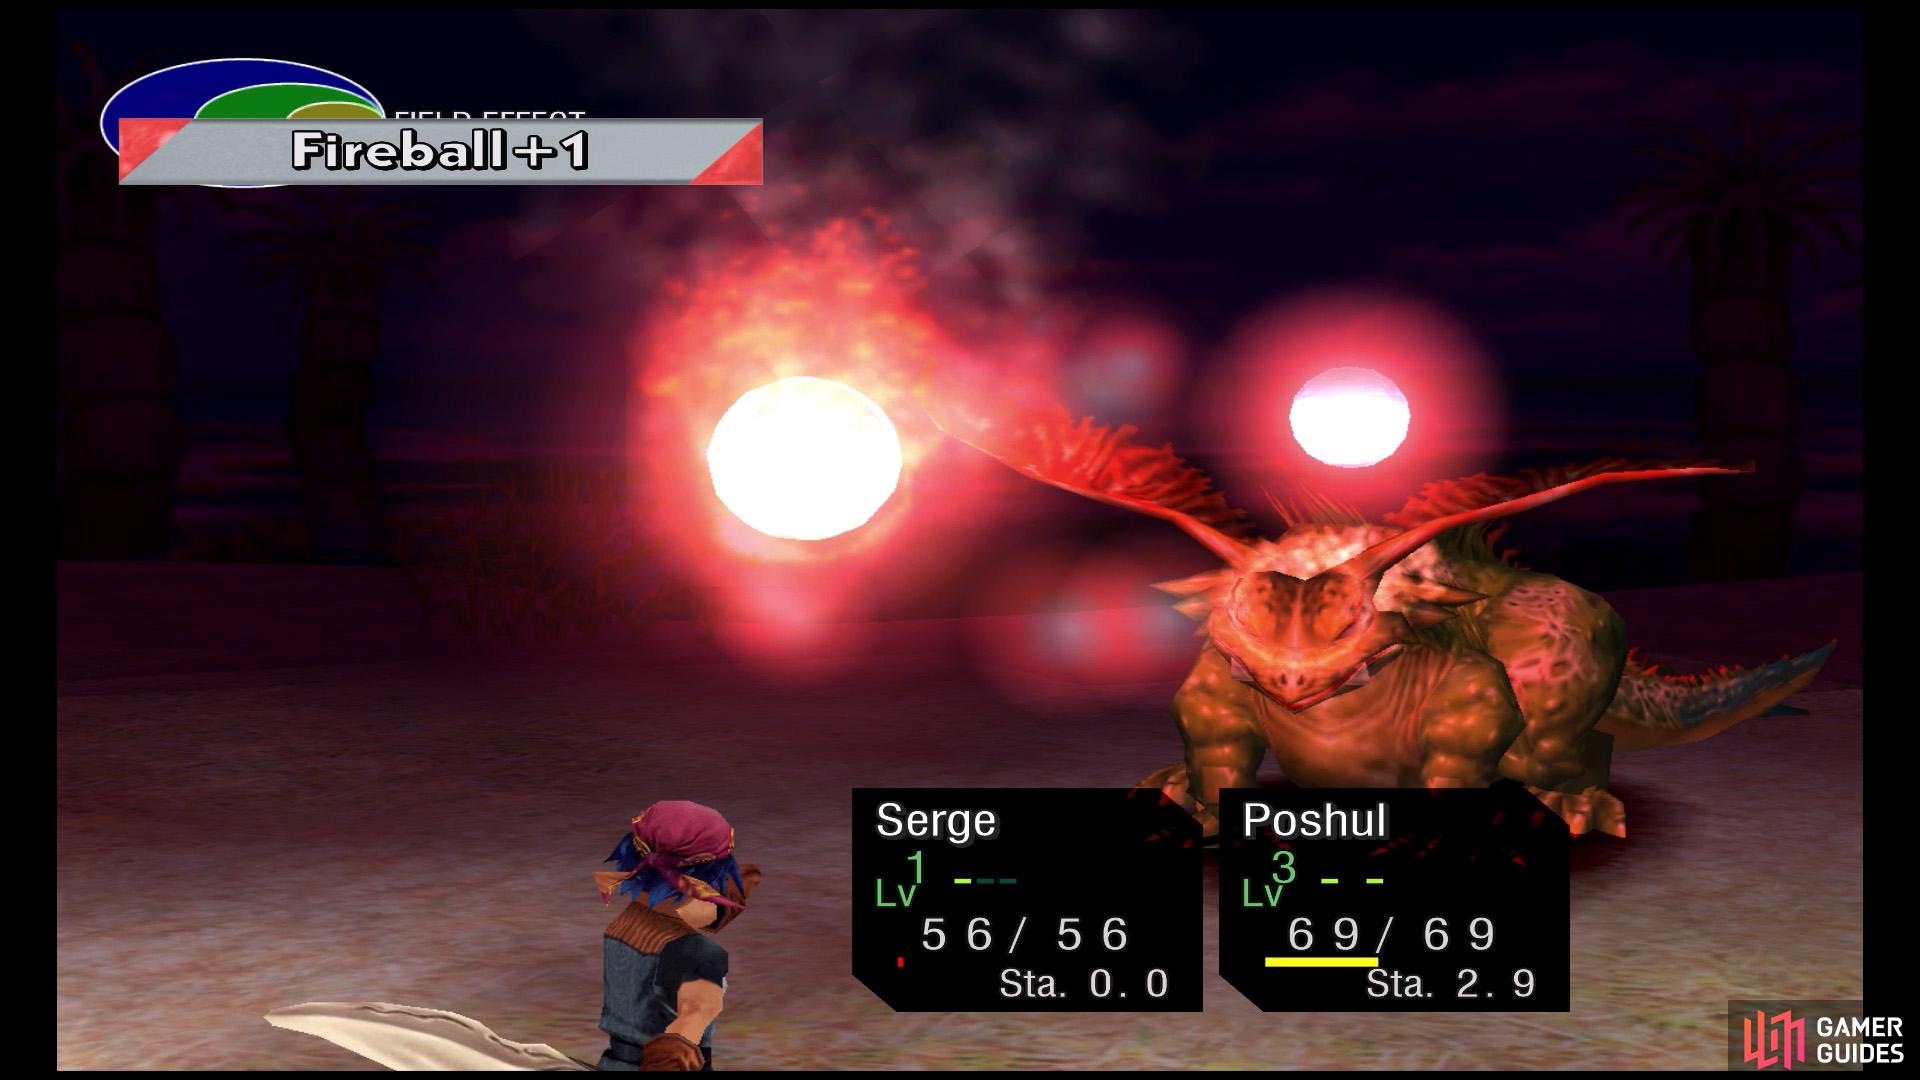 After using Fireball +1, Serge's Elemental Power Level will go down to 1.